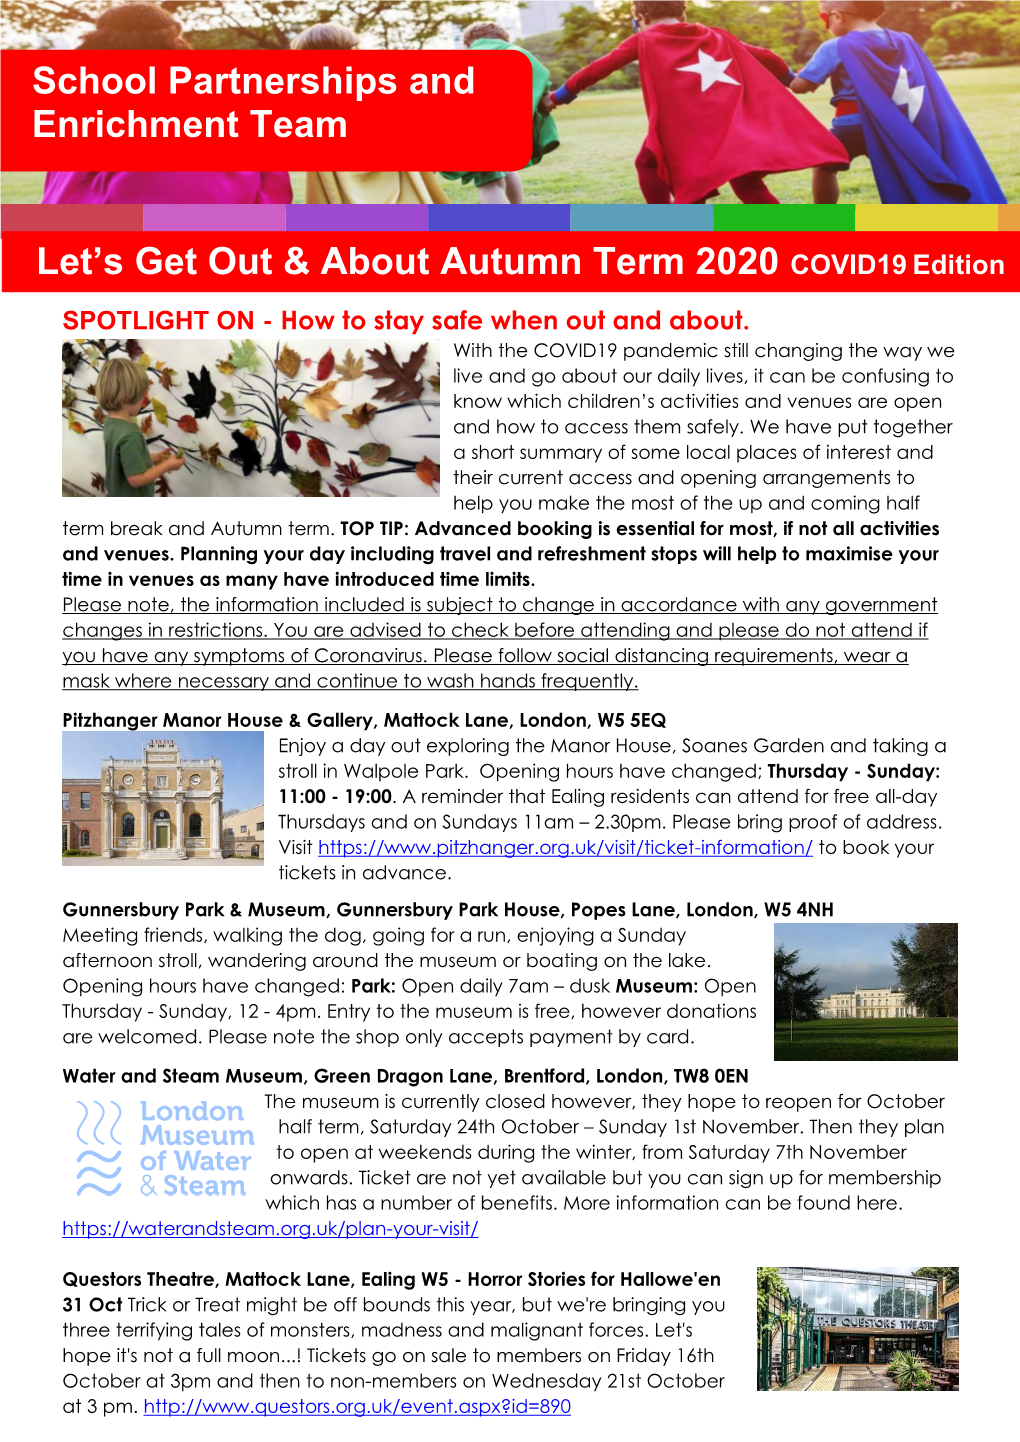 Let's Get out & About Autumn Term 2020 COVID19 Edition School